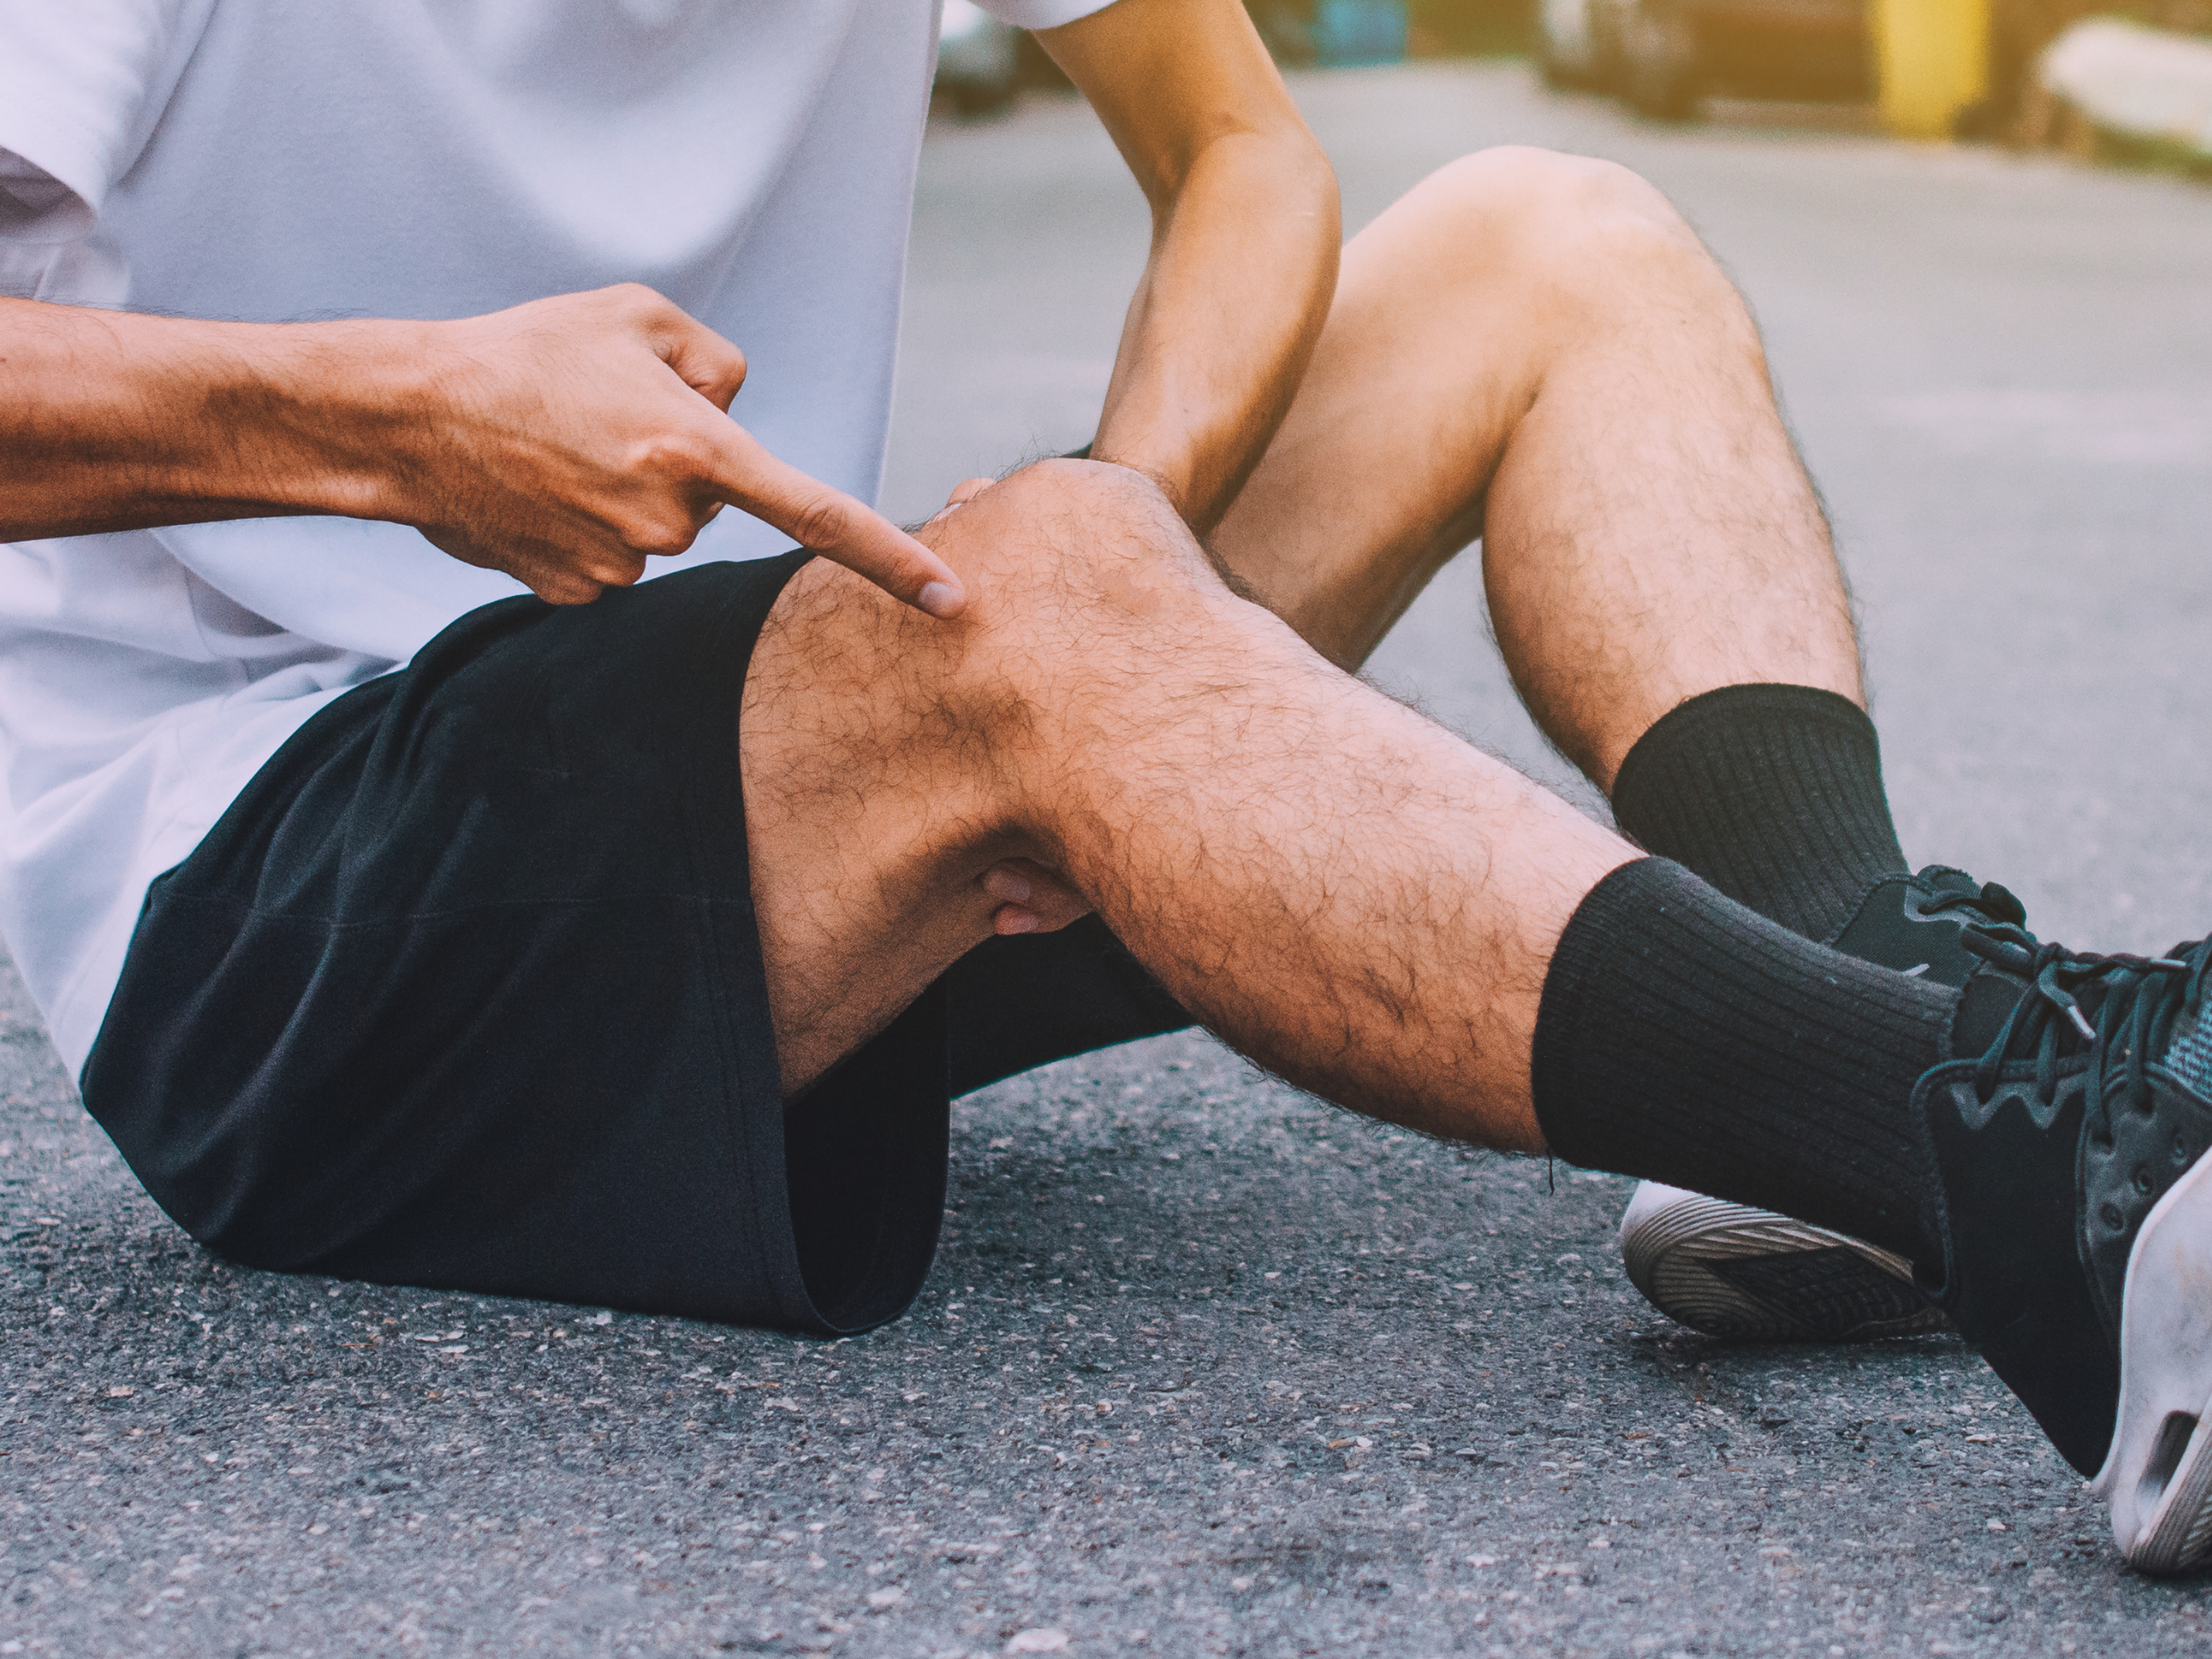 Male runner with IT band syndrome sitting on the ground.